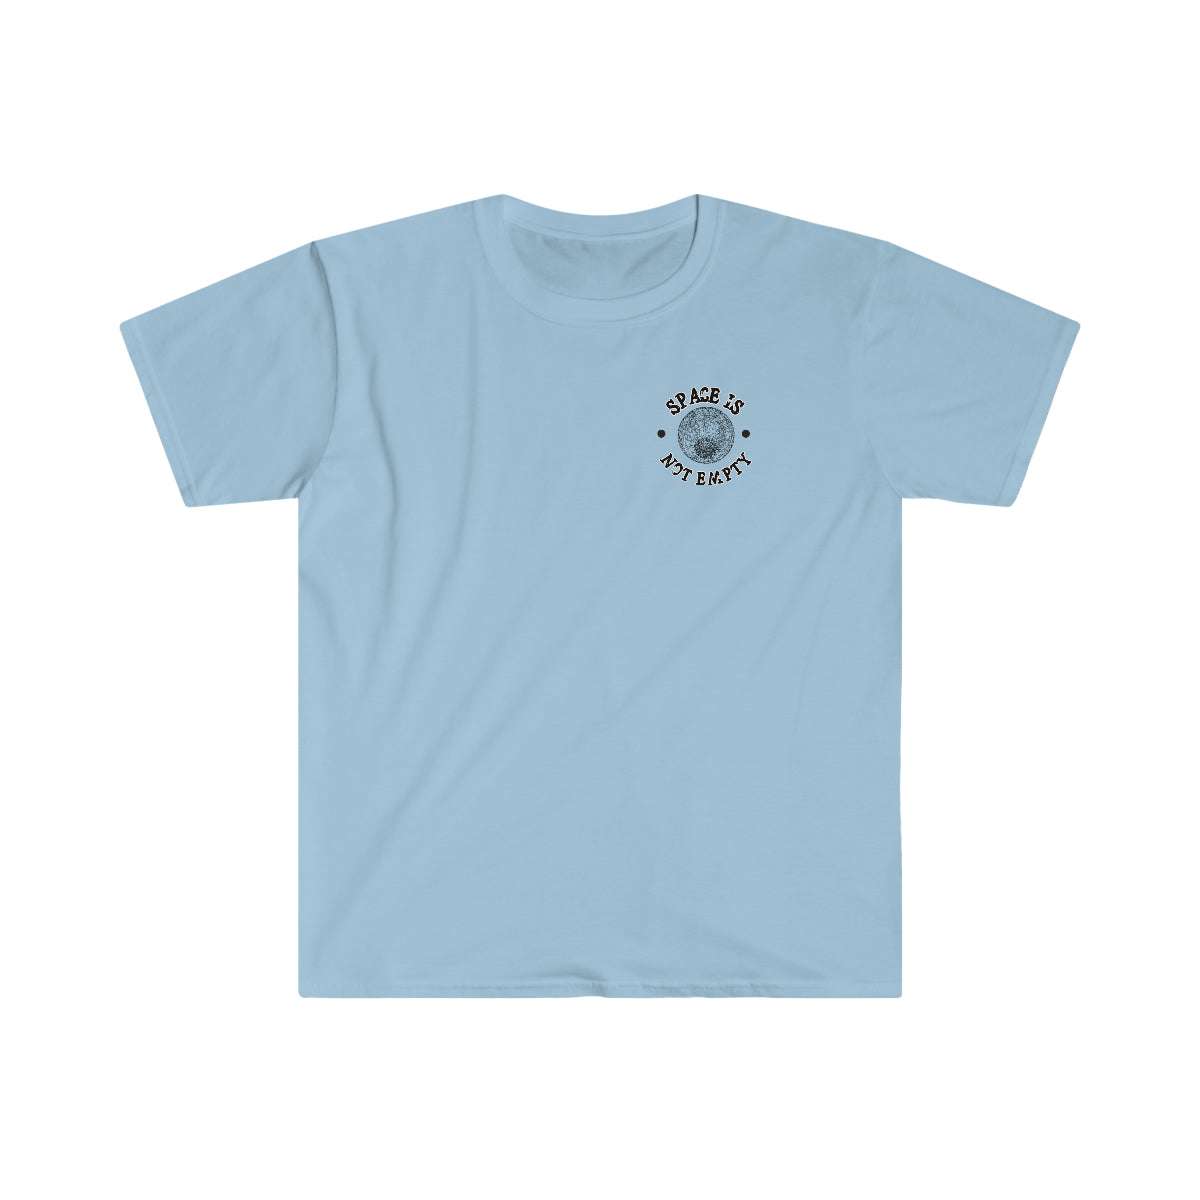 A light blue Stages of Landing T-Shirt with a circle print.